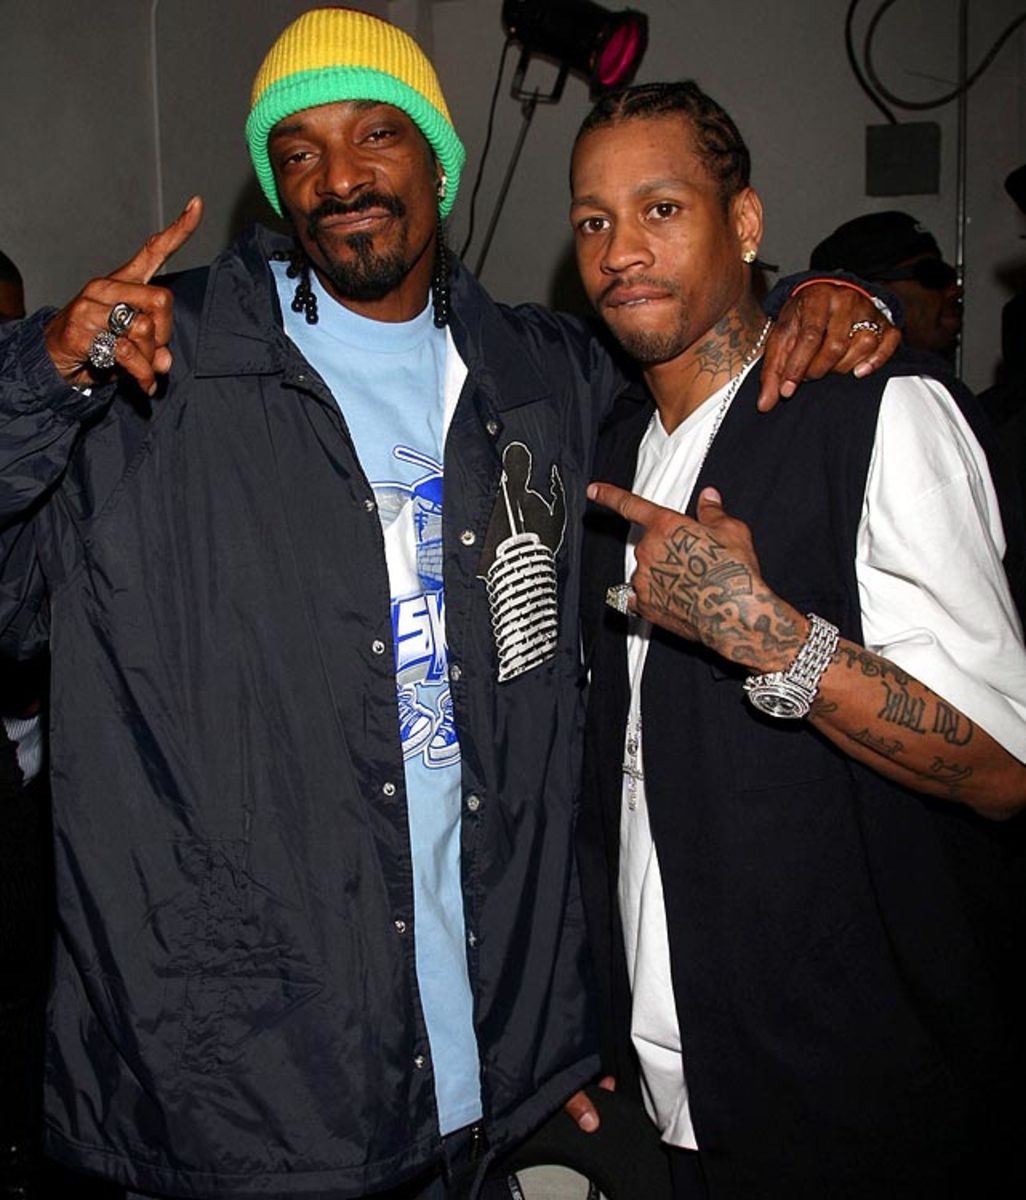 Snoop Dogg and Allen Iverson